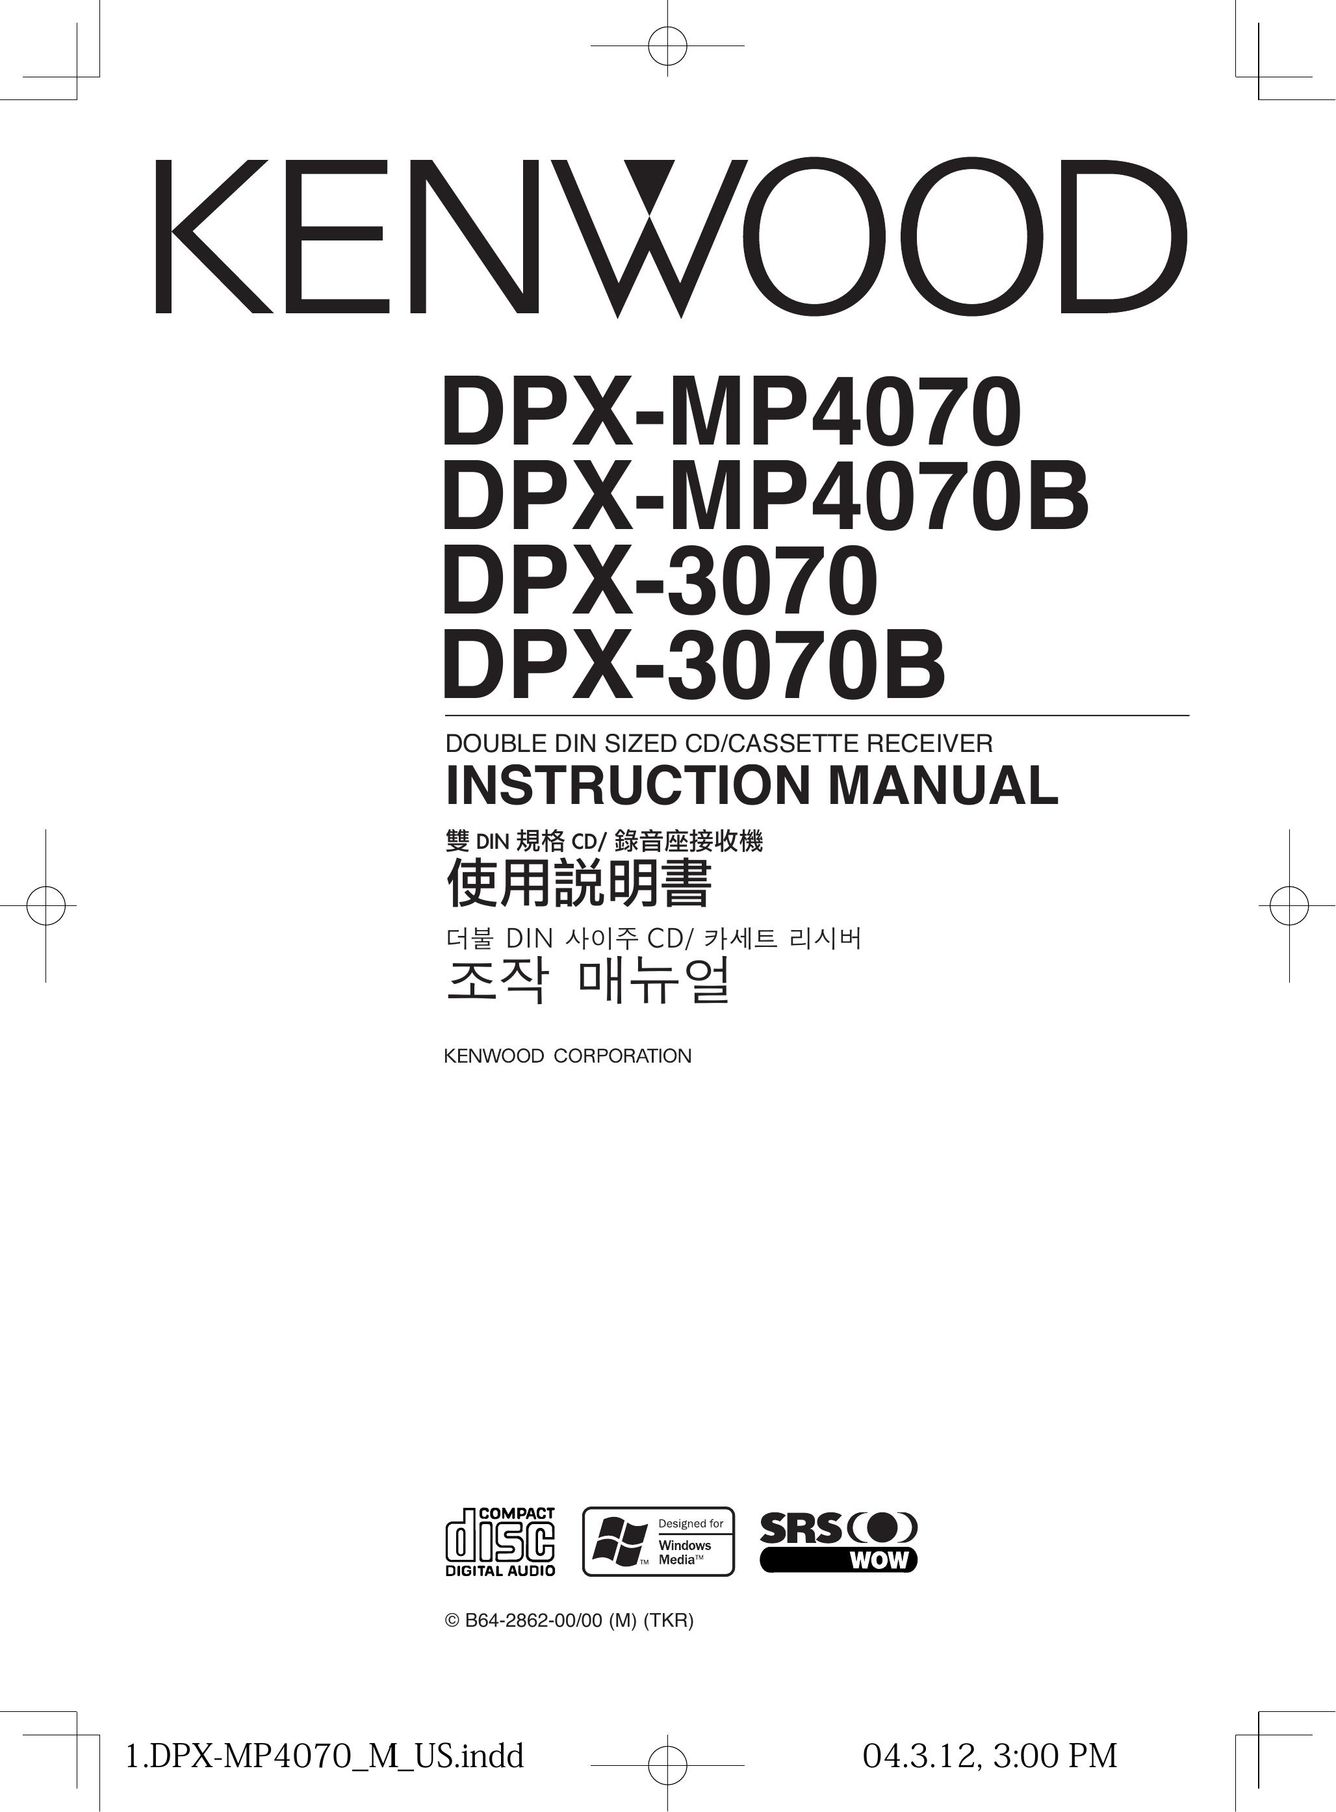 Kenwood DPX-3070 Car Stereo System User Manual